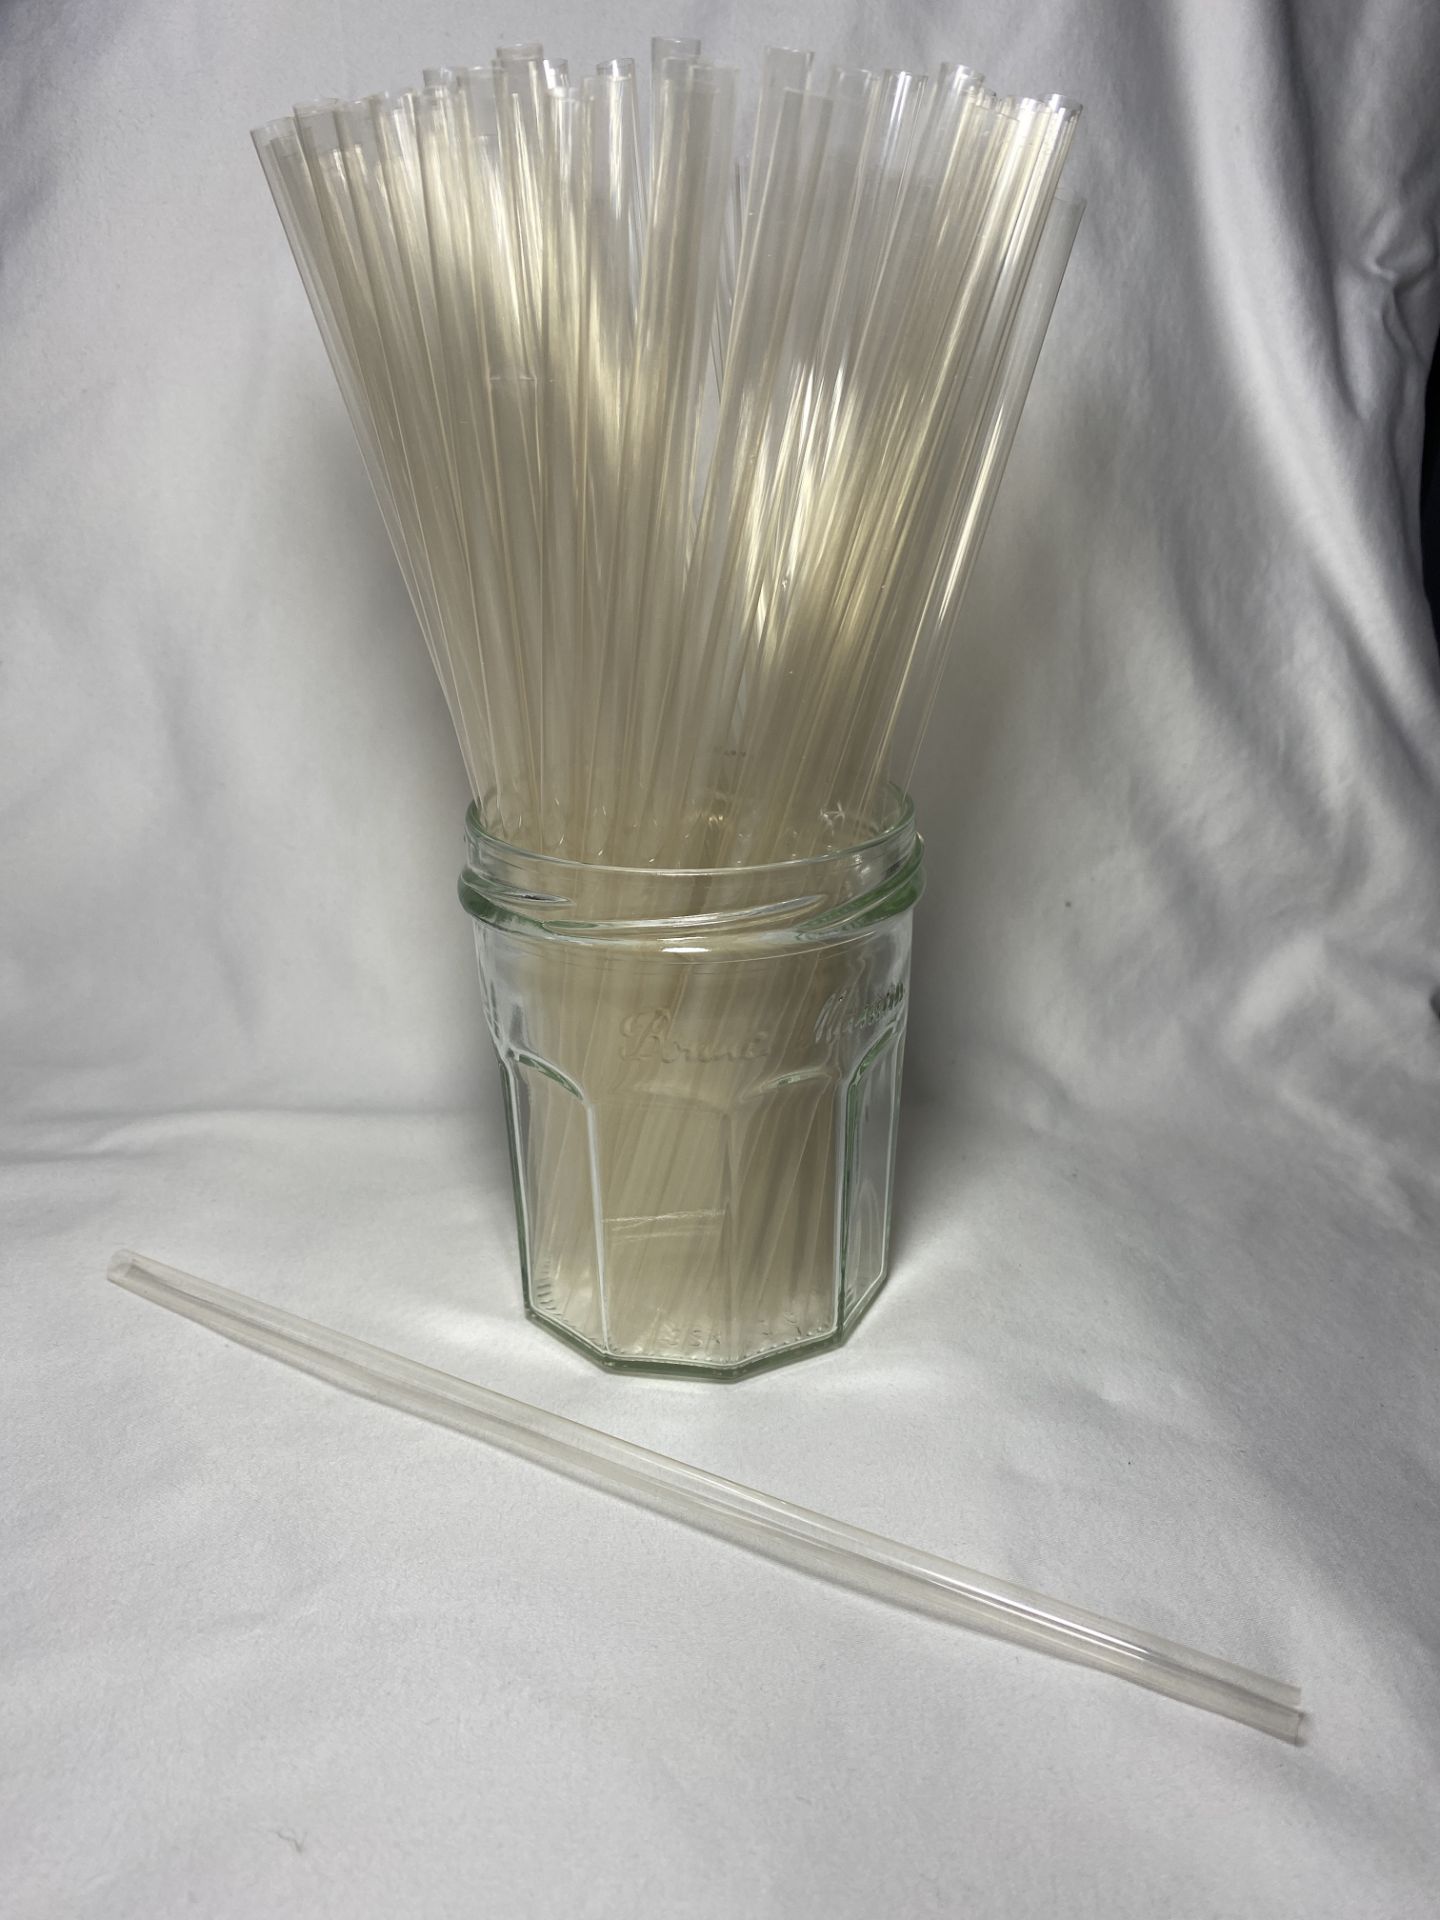 5 x Boxes of Clear PLA Compostable Jumbo Straws by 888 Gastro Disposables - Image 2 of 3